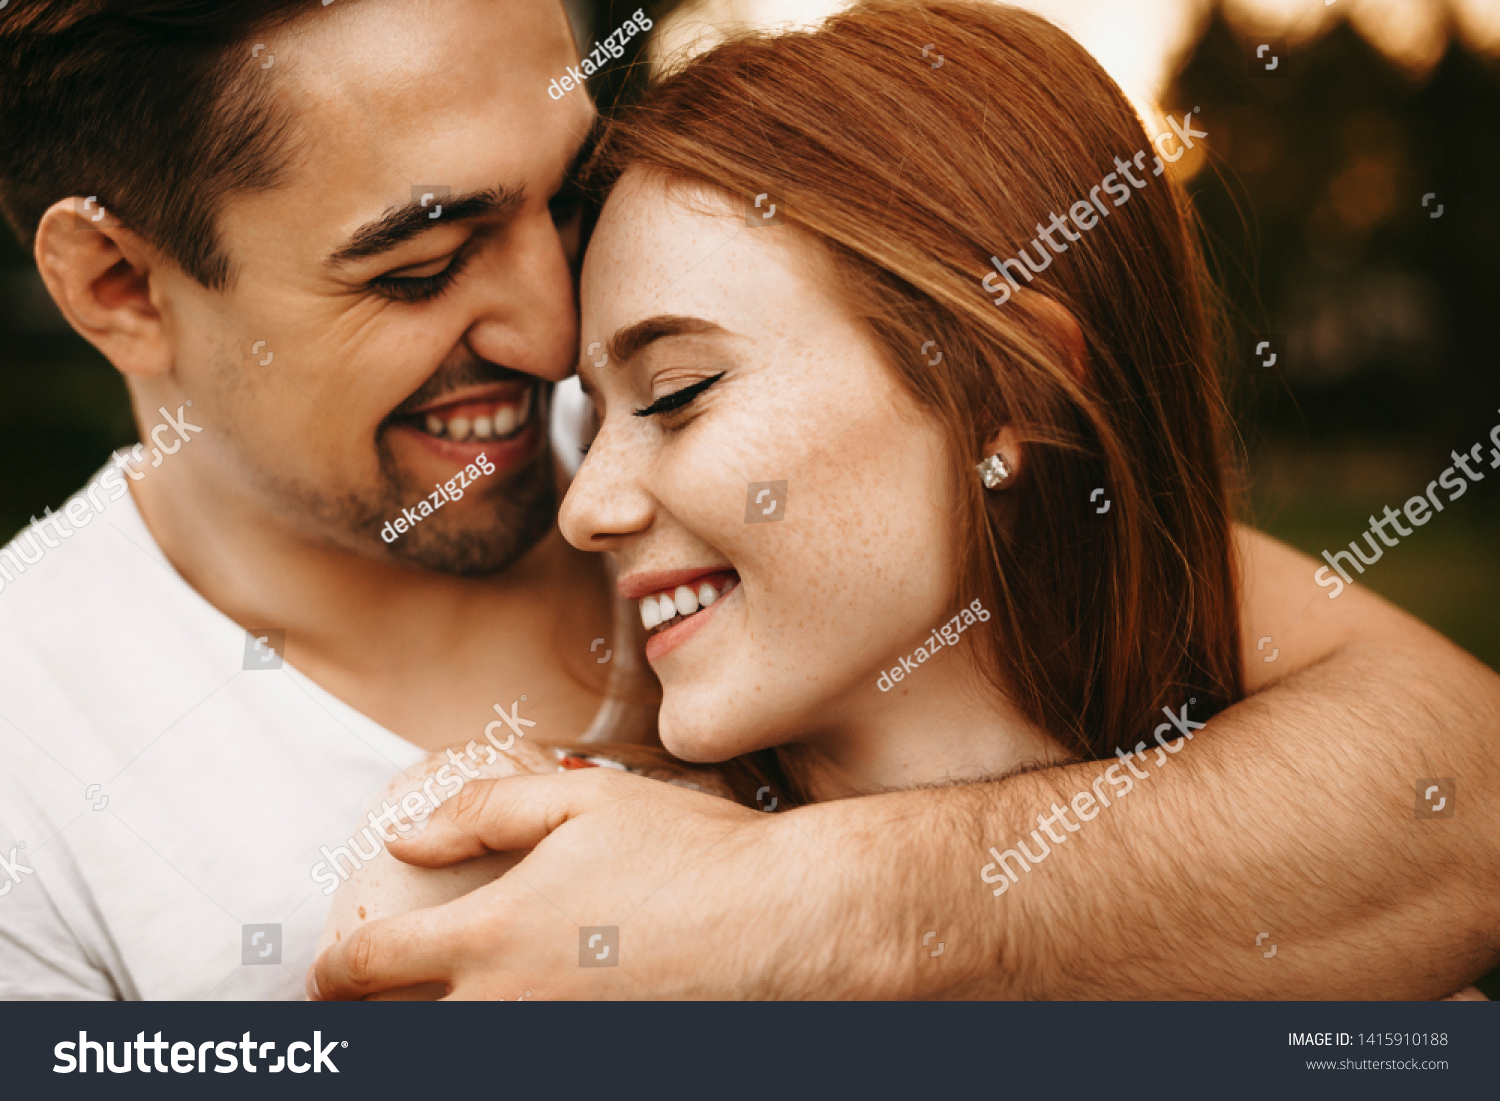 Close up portrait of a amazing young female with red hair and freckles smiling with closed eyes while being embraced from back by her boyfriend closely outside. #1415910188